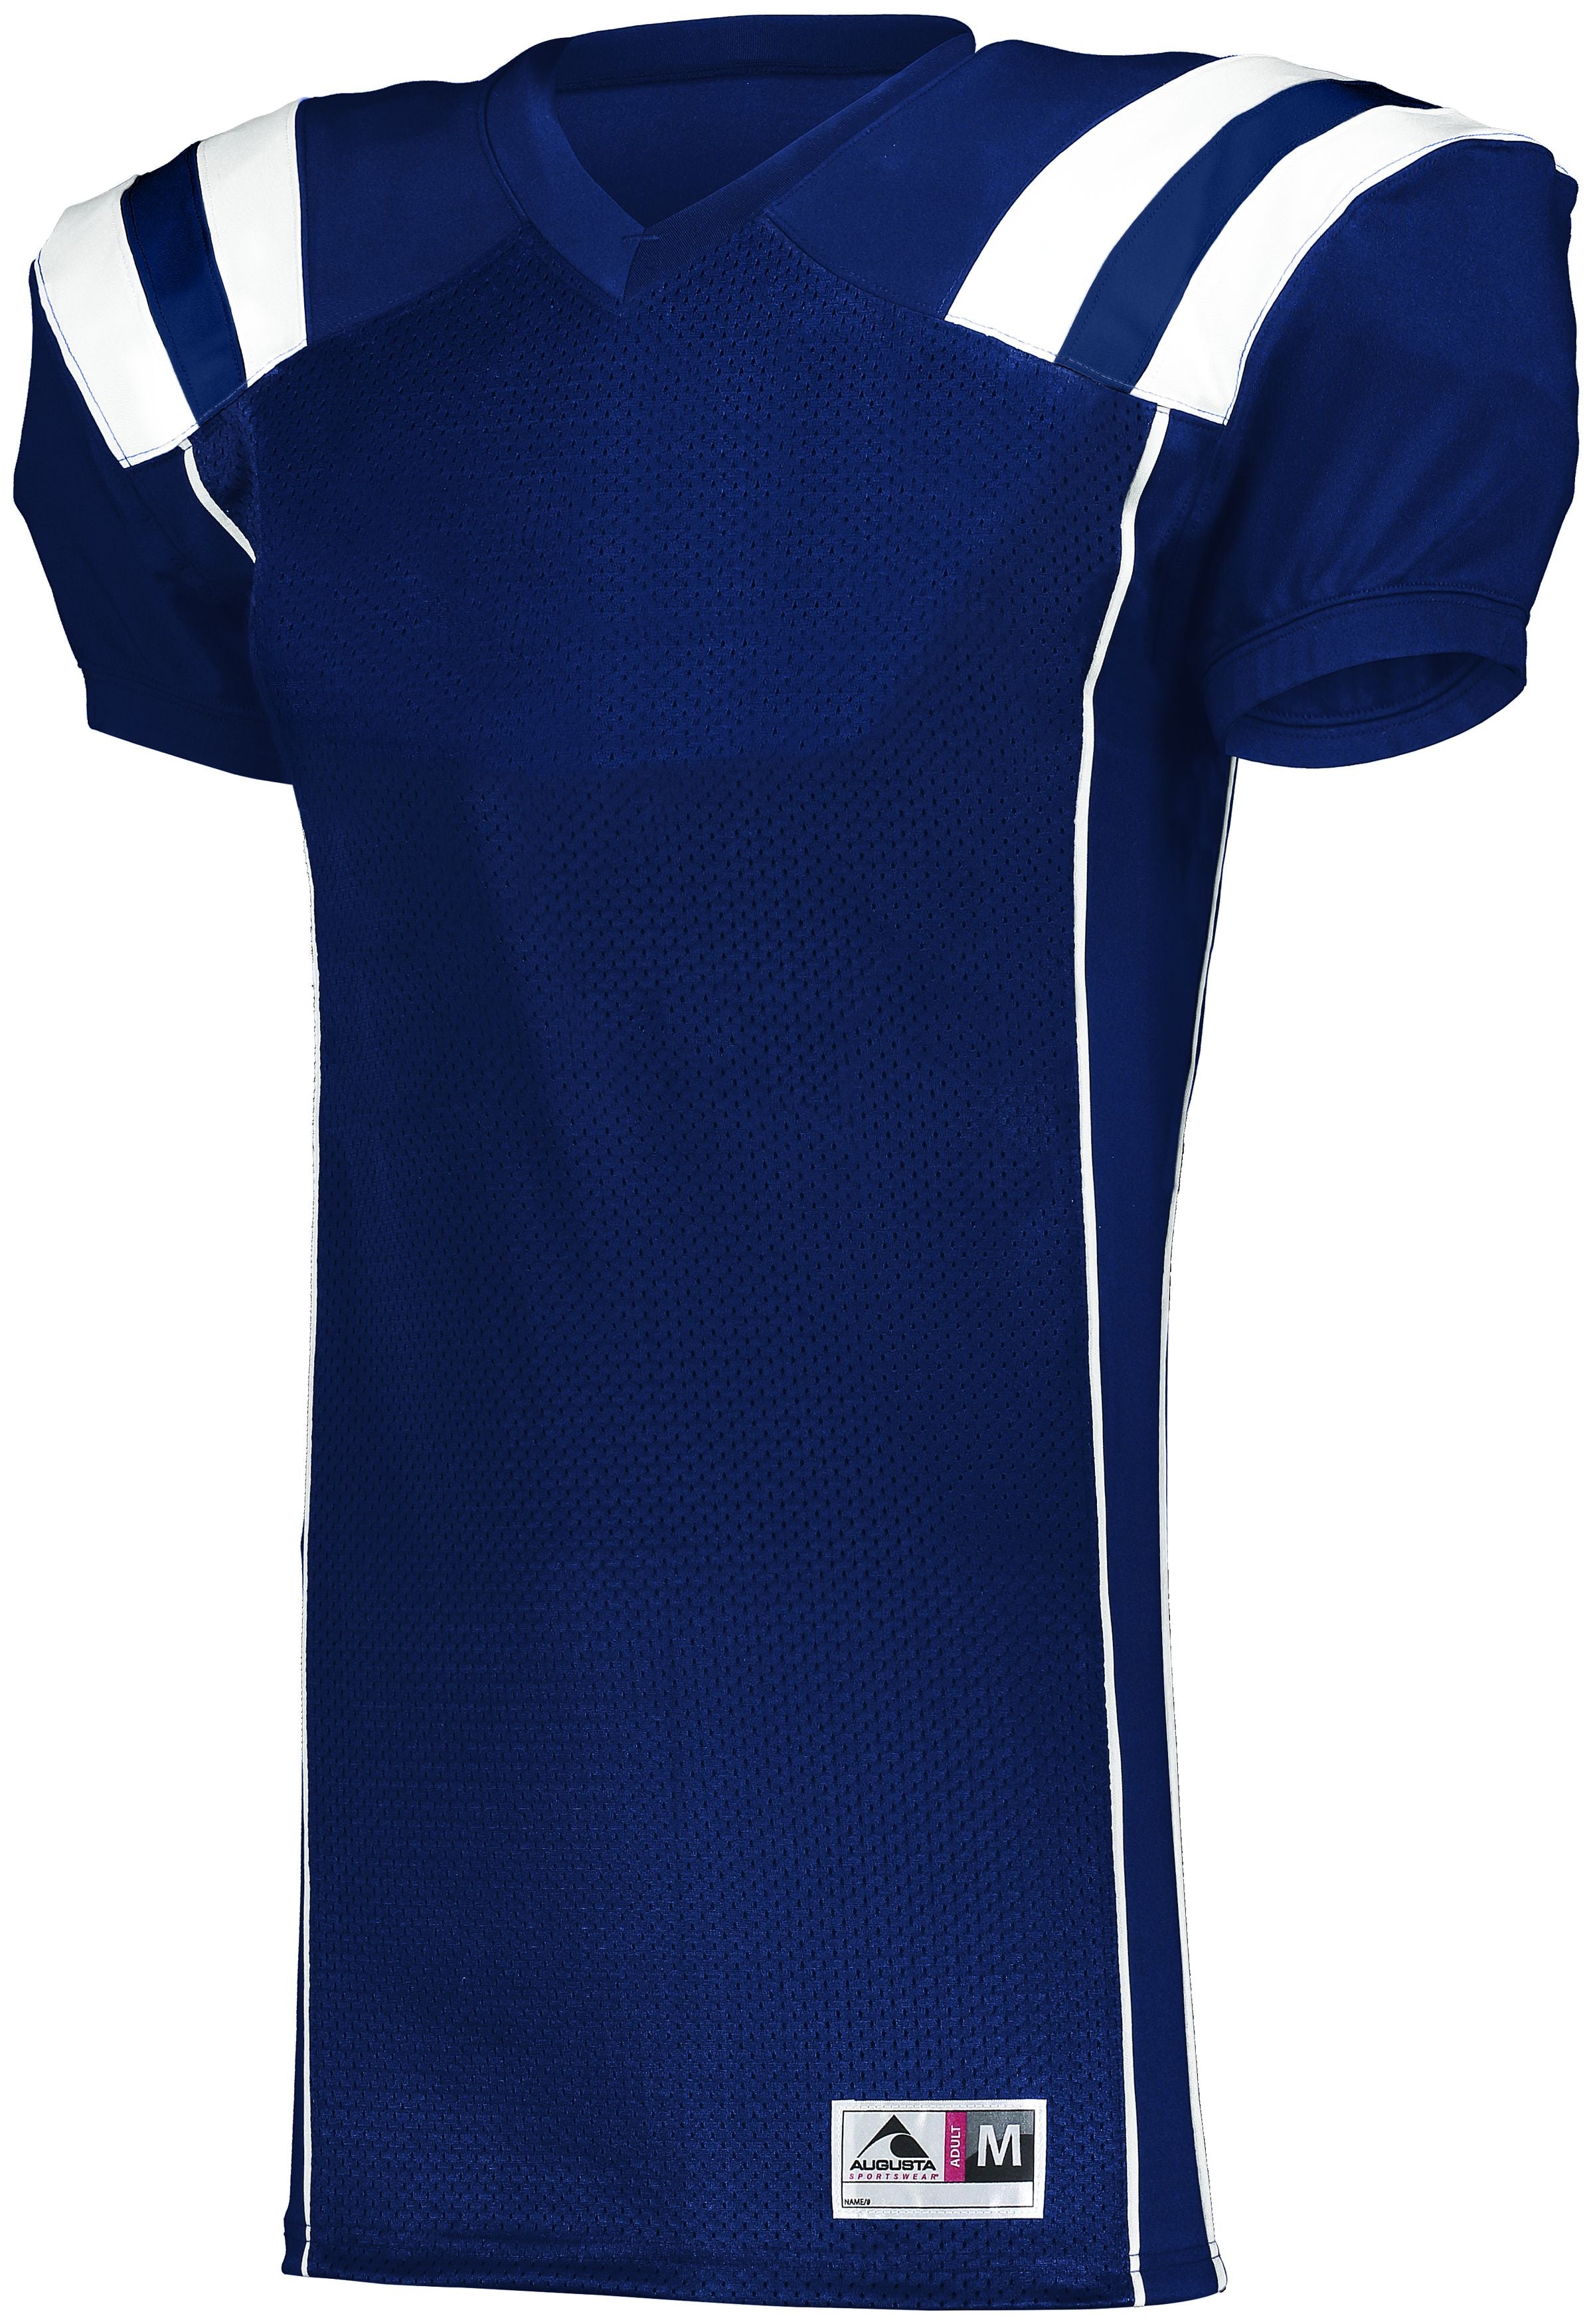 Augusta Sportswear Youth Tform Football Jersey in Navy/White  -Part of the Youth, Youth-Jersey, Augusta-Products, Football, Shirts, All-Sports, All-Sports-1 product lines at KanaleyCreations.com